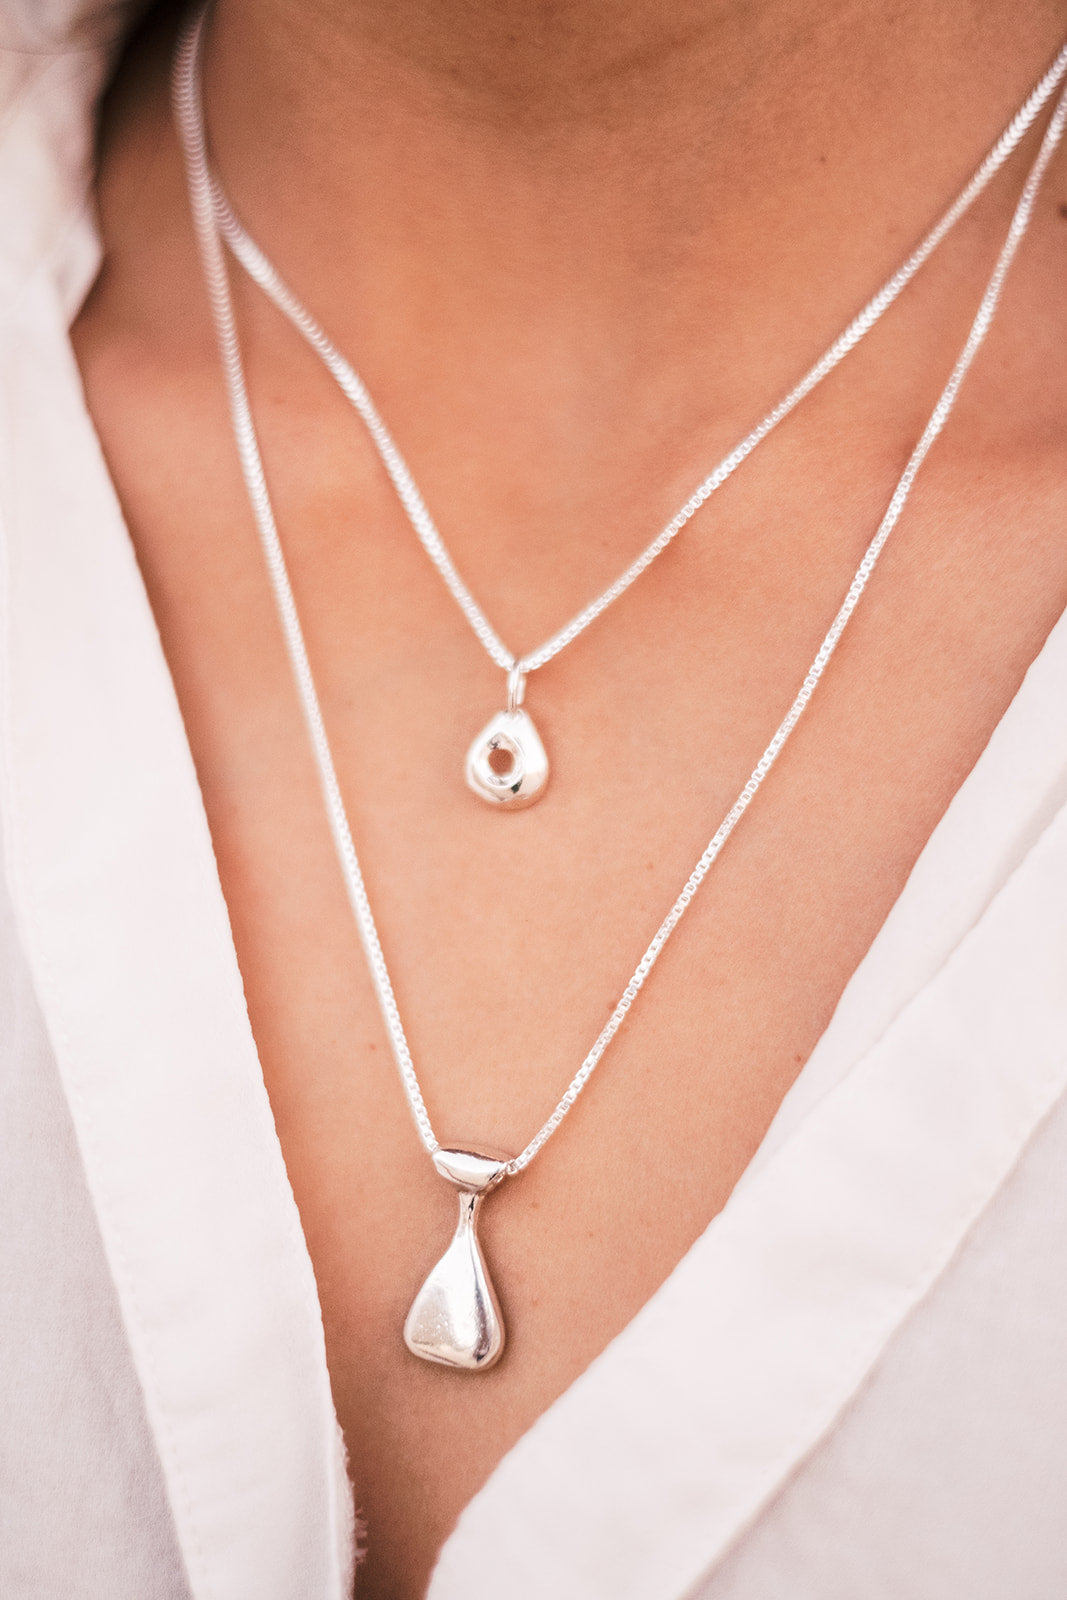 A focused photo of a woman neckline wearing two silver necklaces and a white shirt